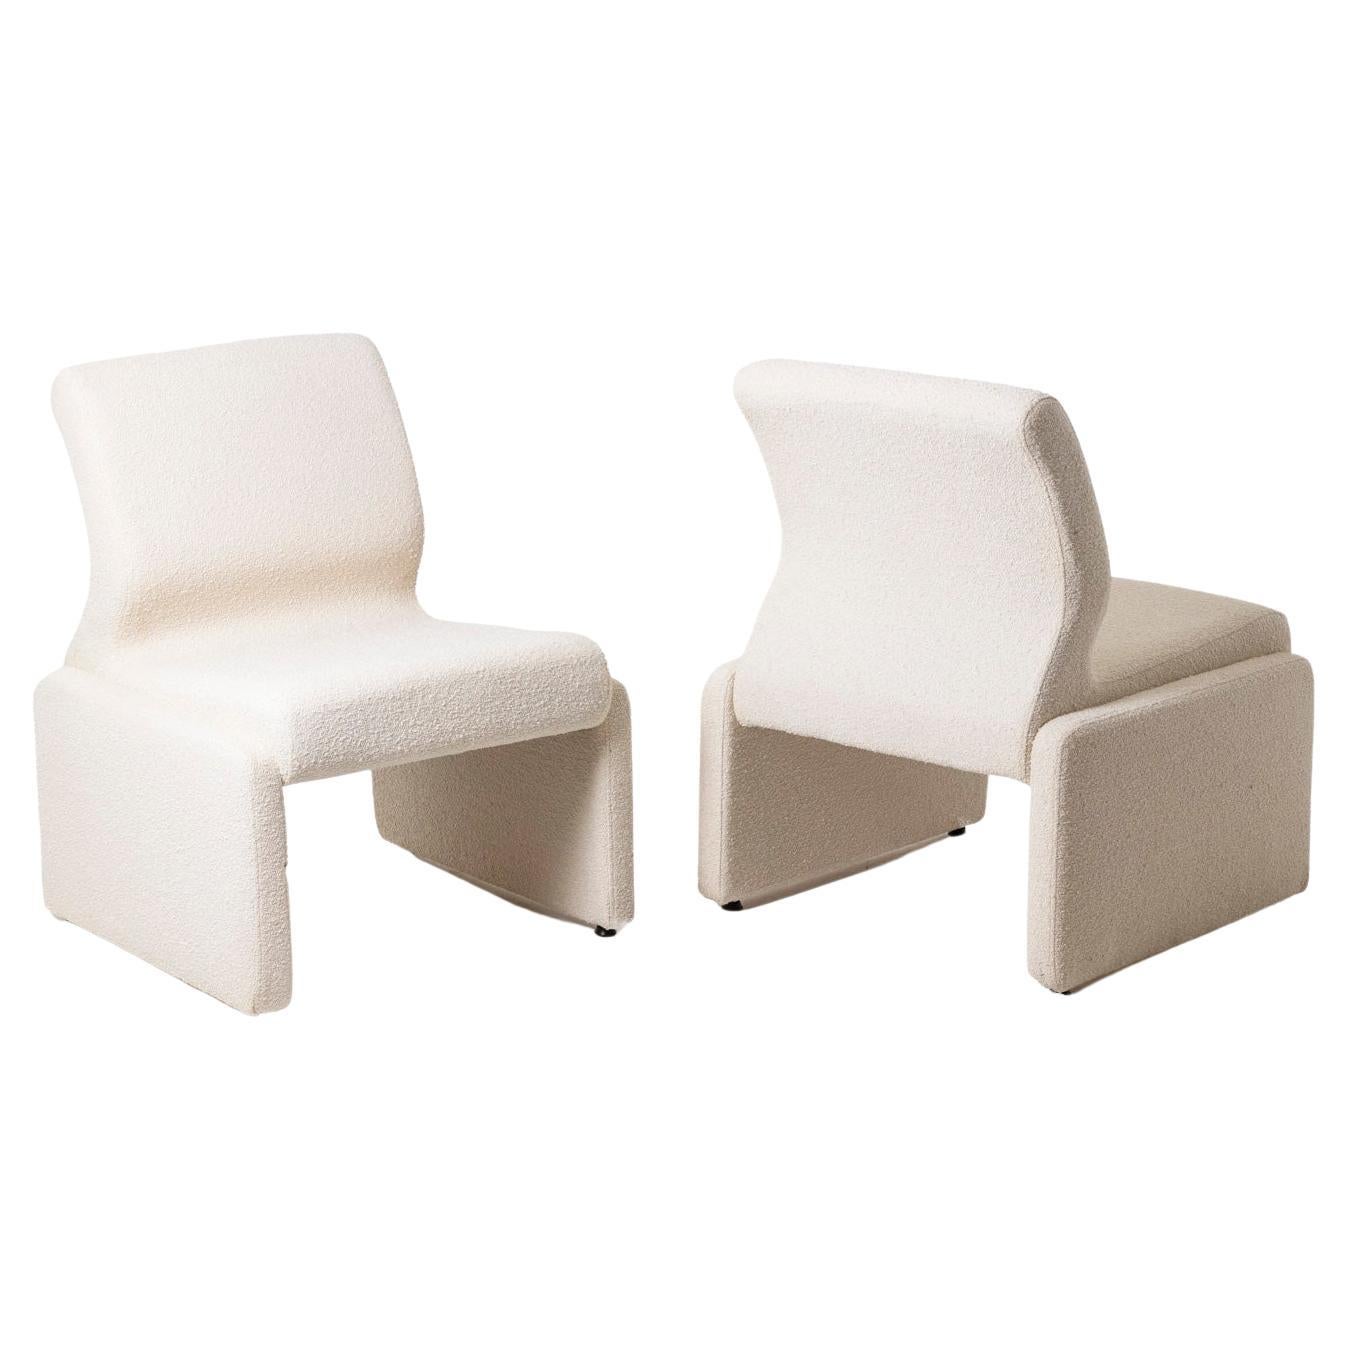 Pair of white bouclé low chairs, 1970s